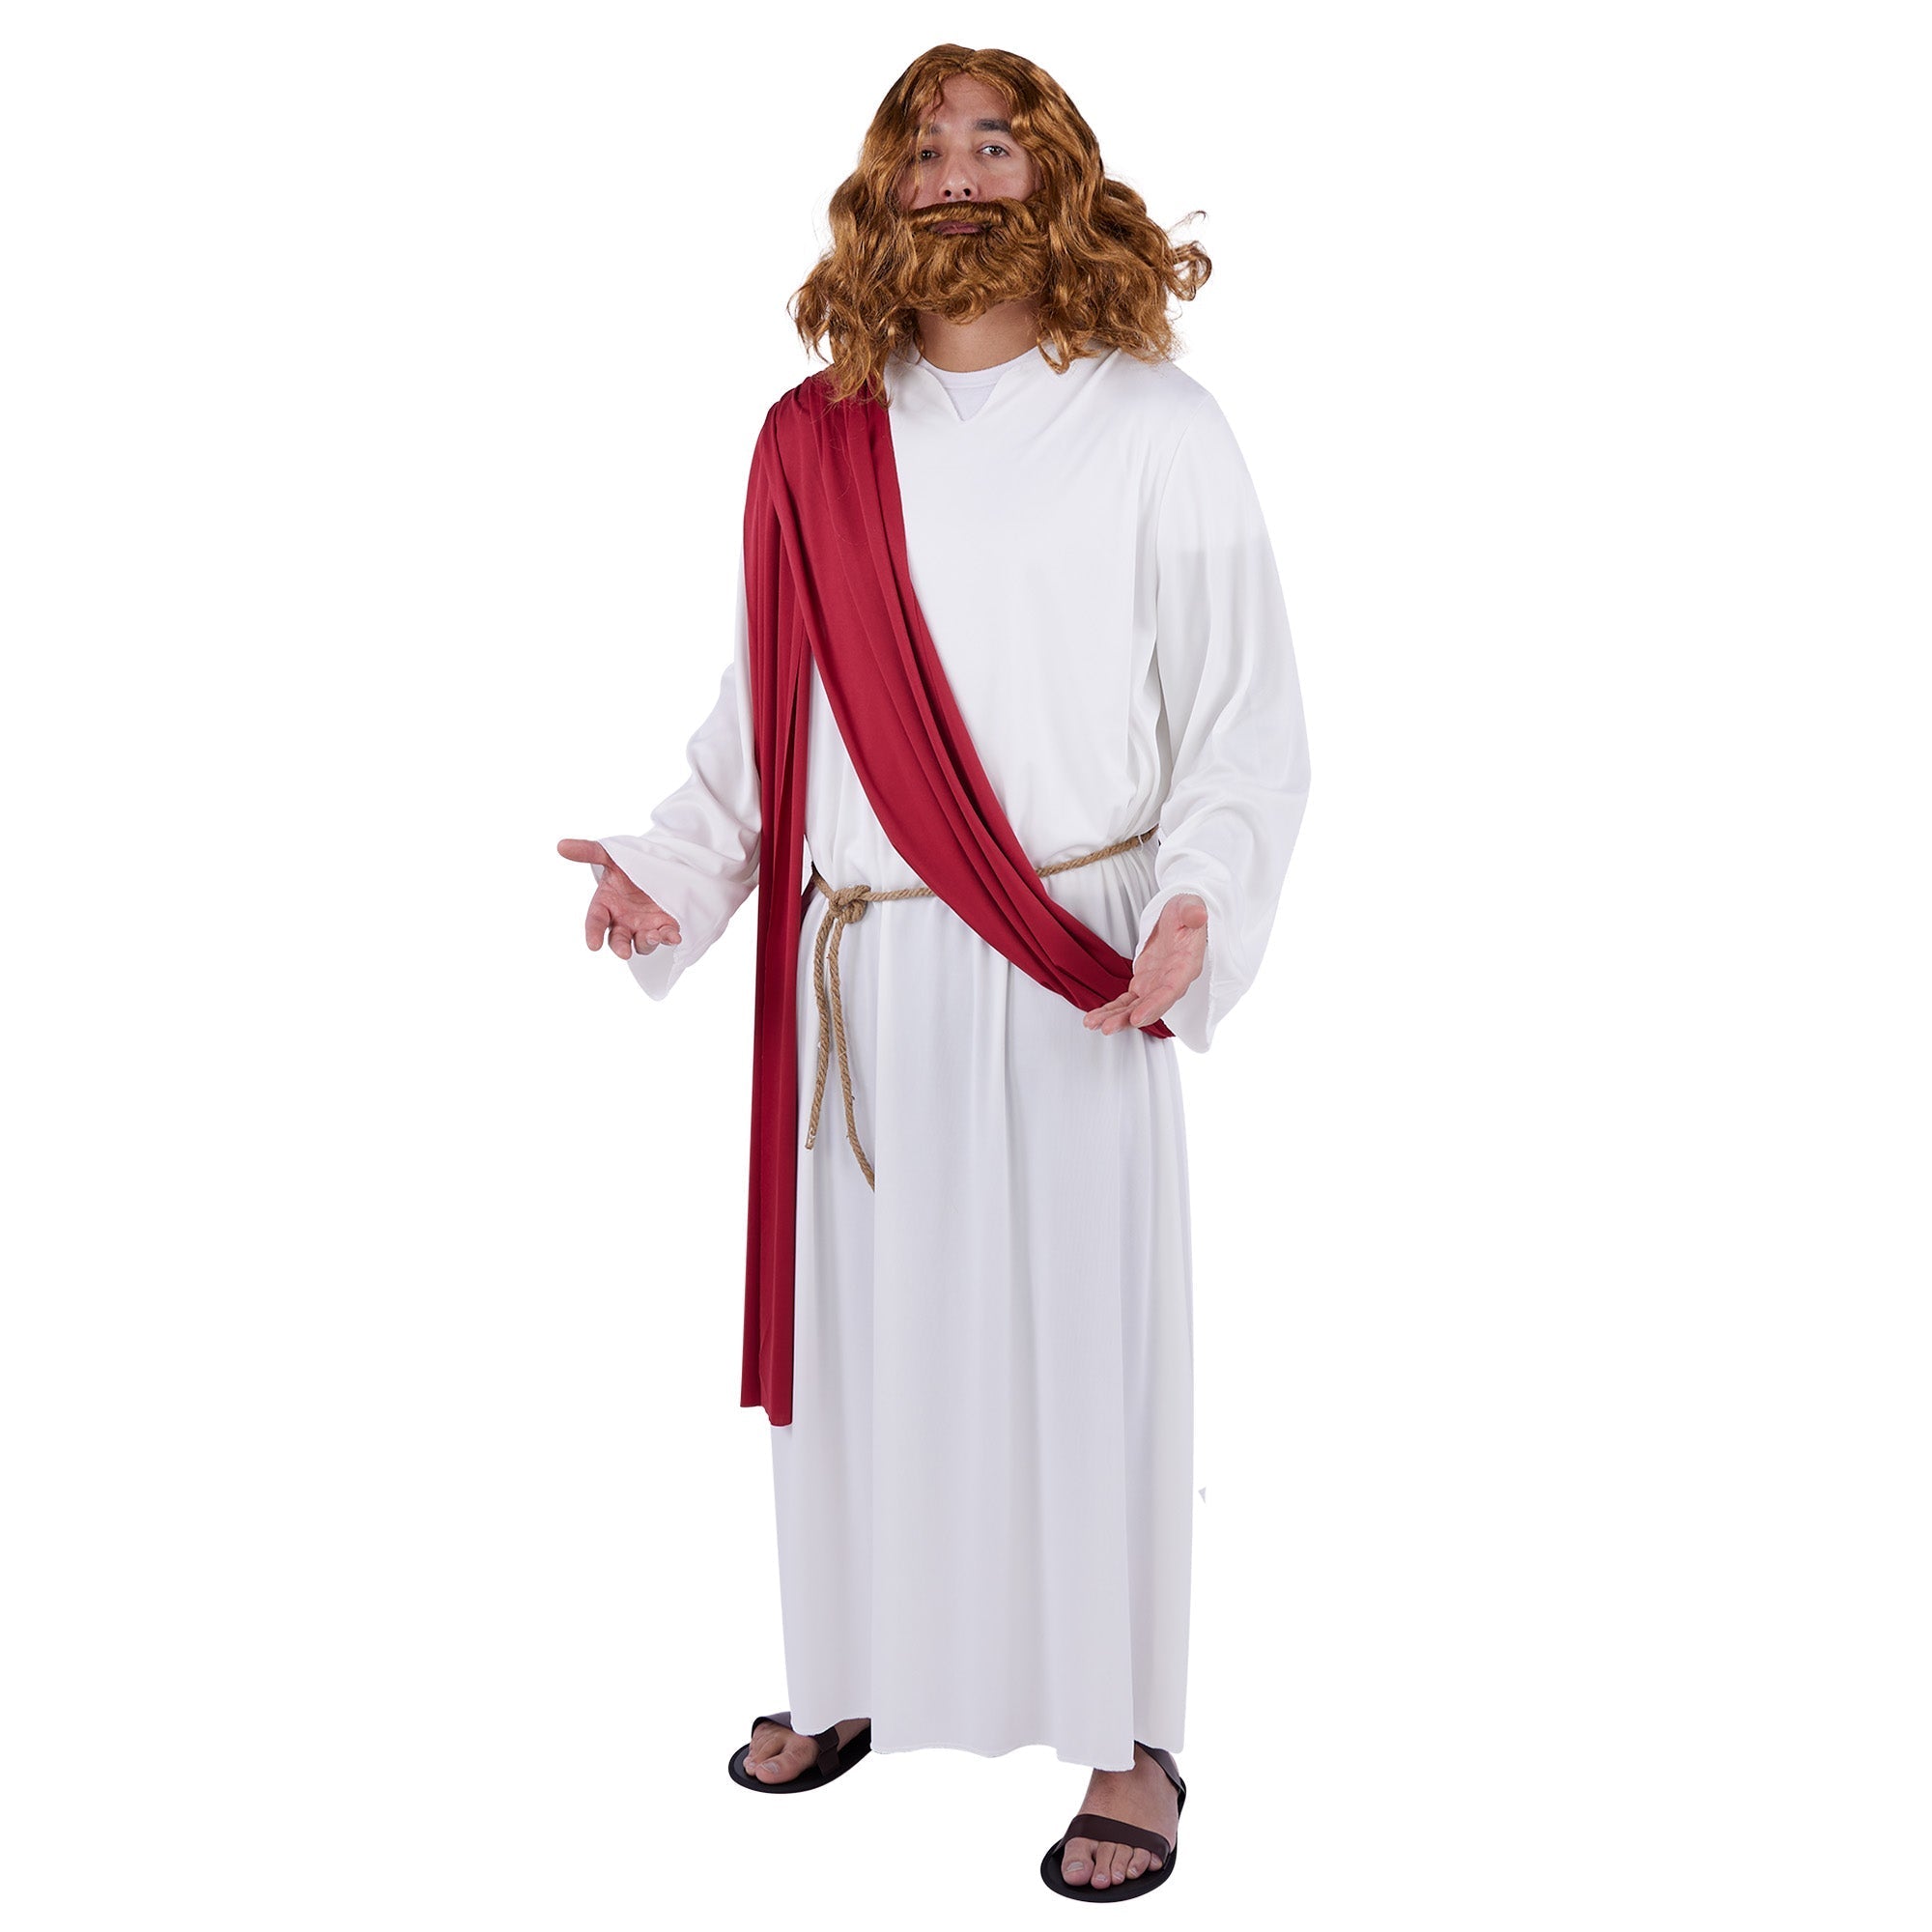 Jesus Costume for Adults, White Robe with Red Sash